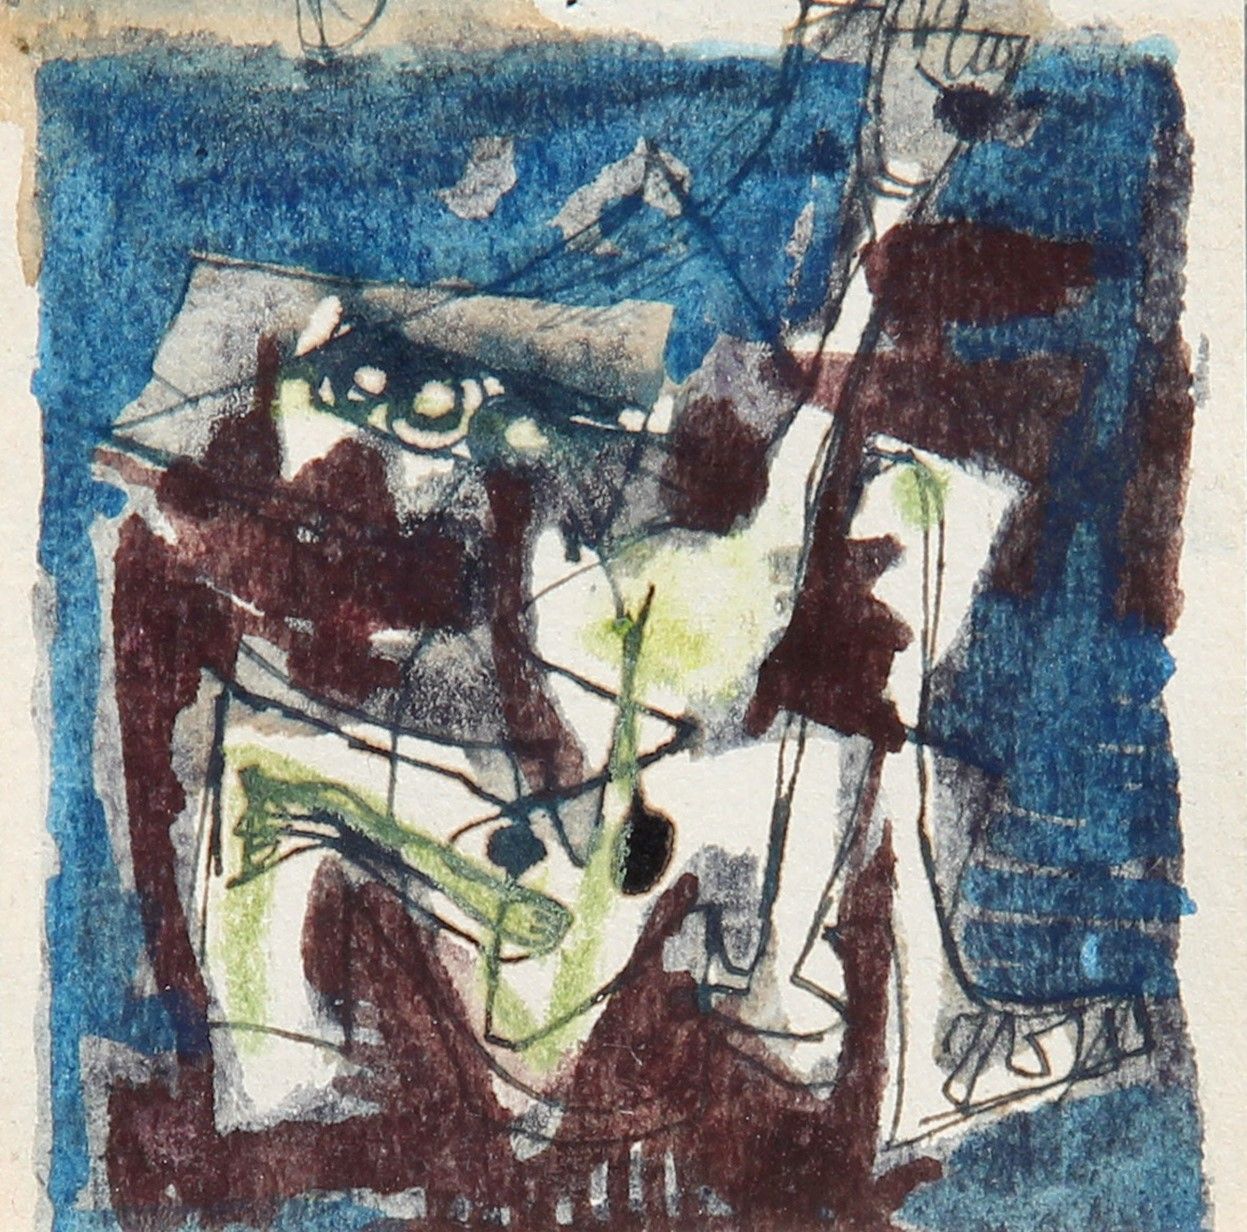 Basaldella AFRO Untitled 1952-1953, mixed media on paper, cm. 7,8x7,2

Certifica&hellip;